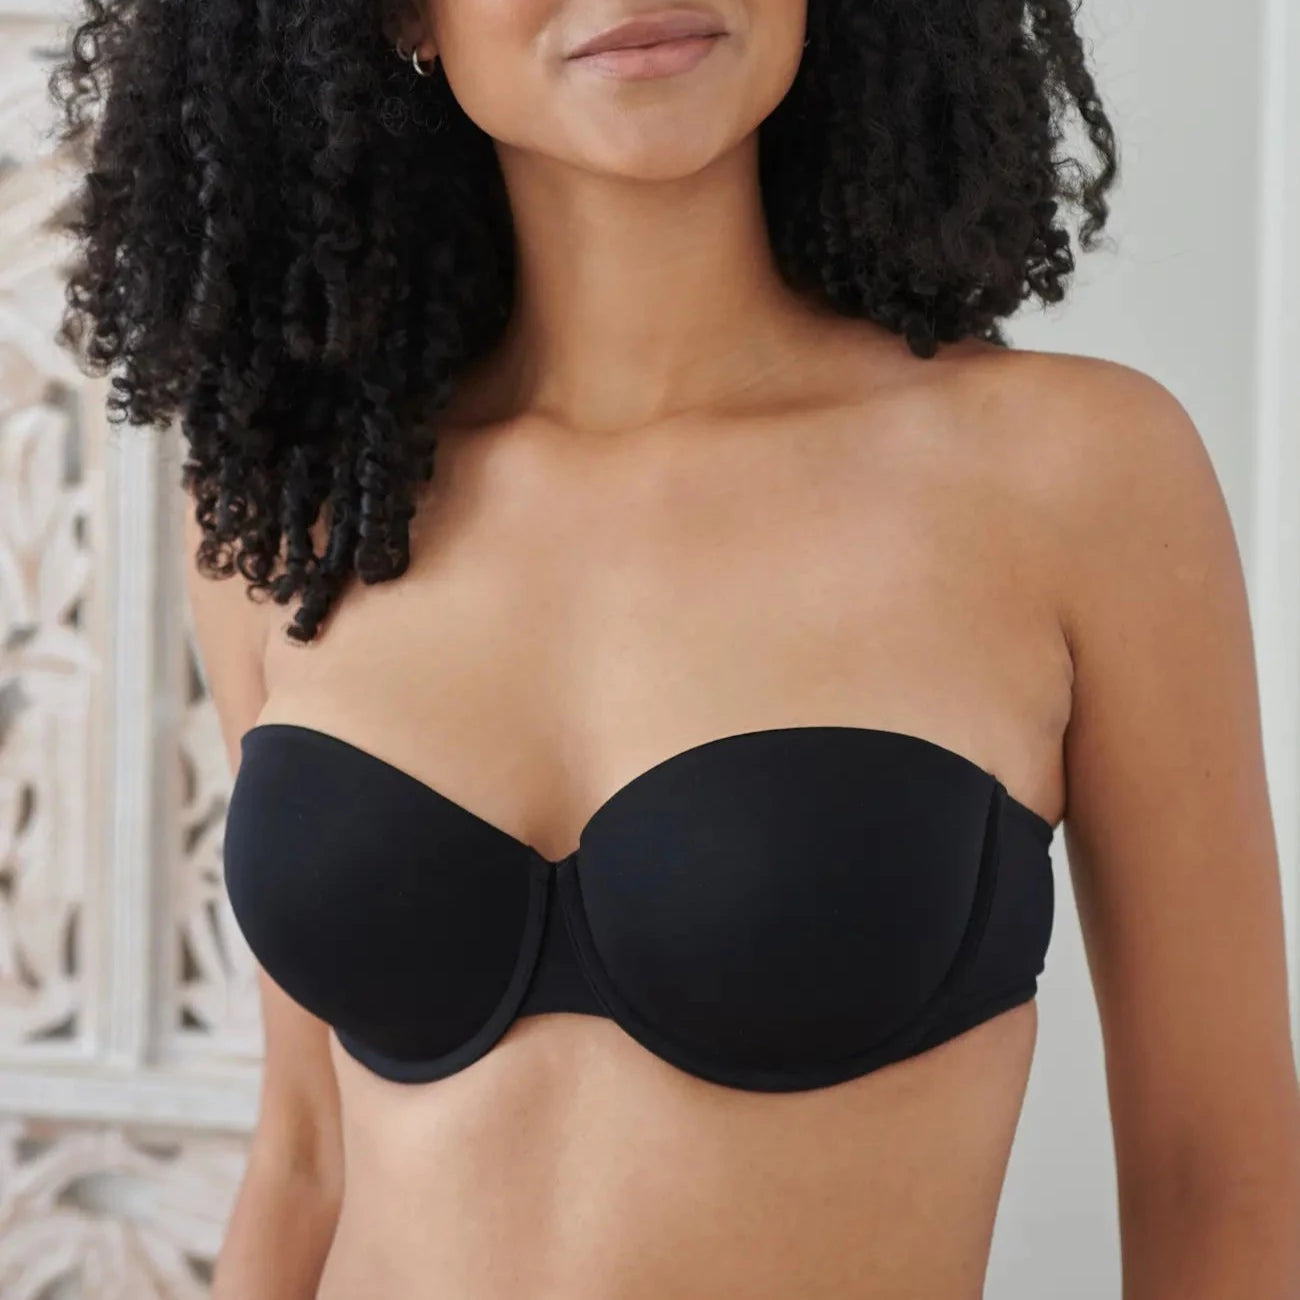 Push Up Strapless Bra With Thick Cup Support And Padded Push Up Matching Bra  And Underwear In Wire Bone Sizes 32 42 A E From Dou01, $7.27